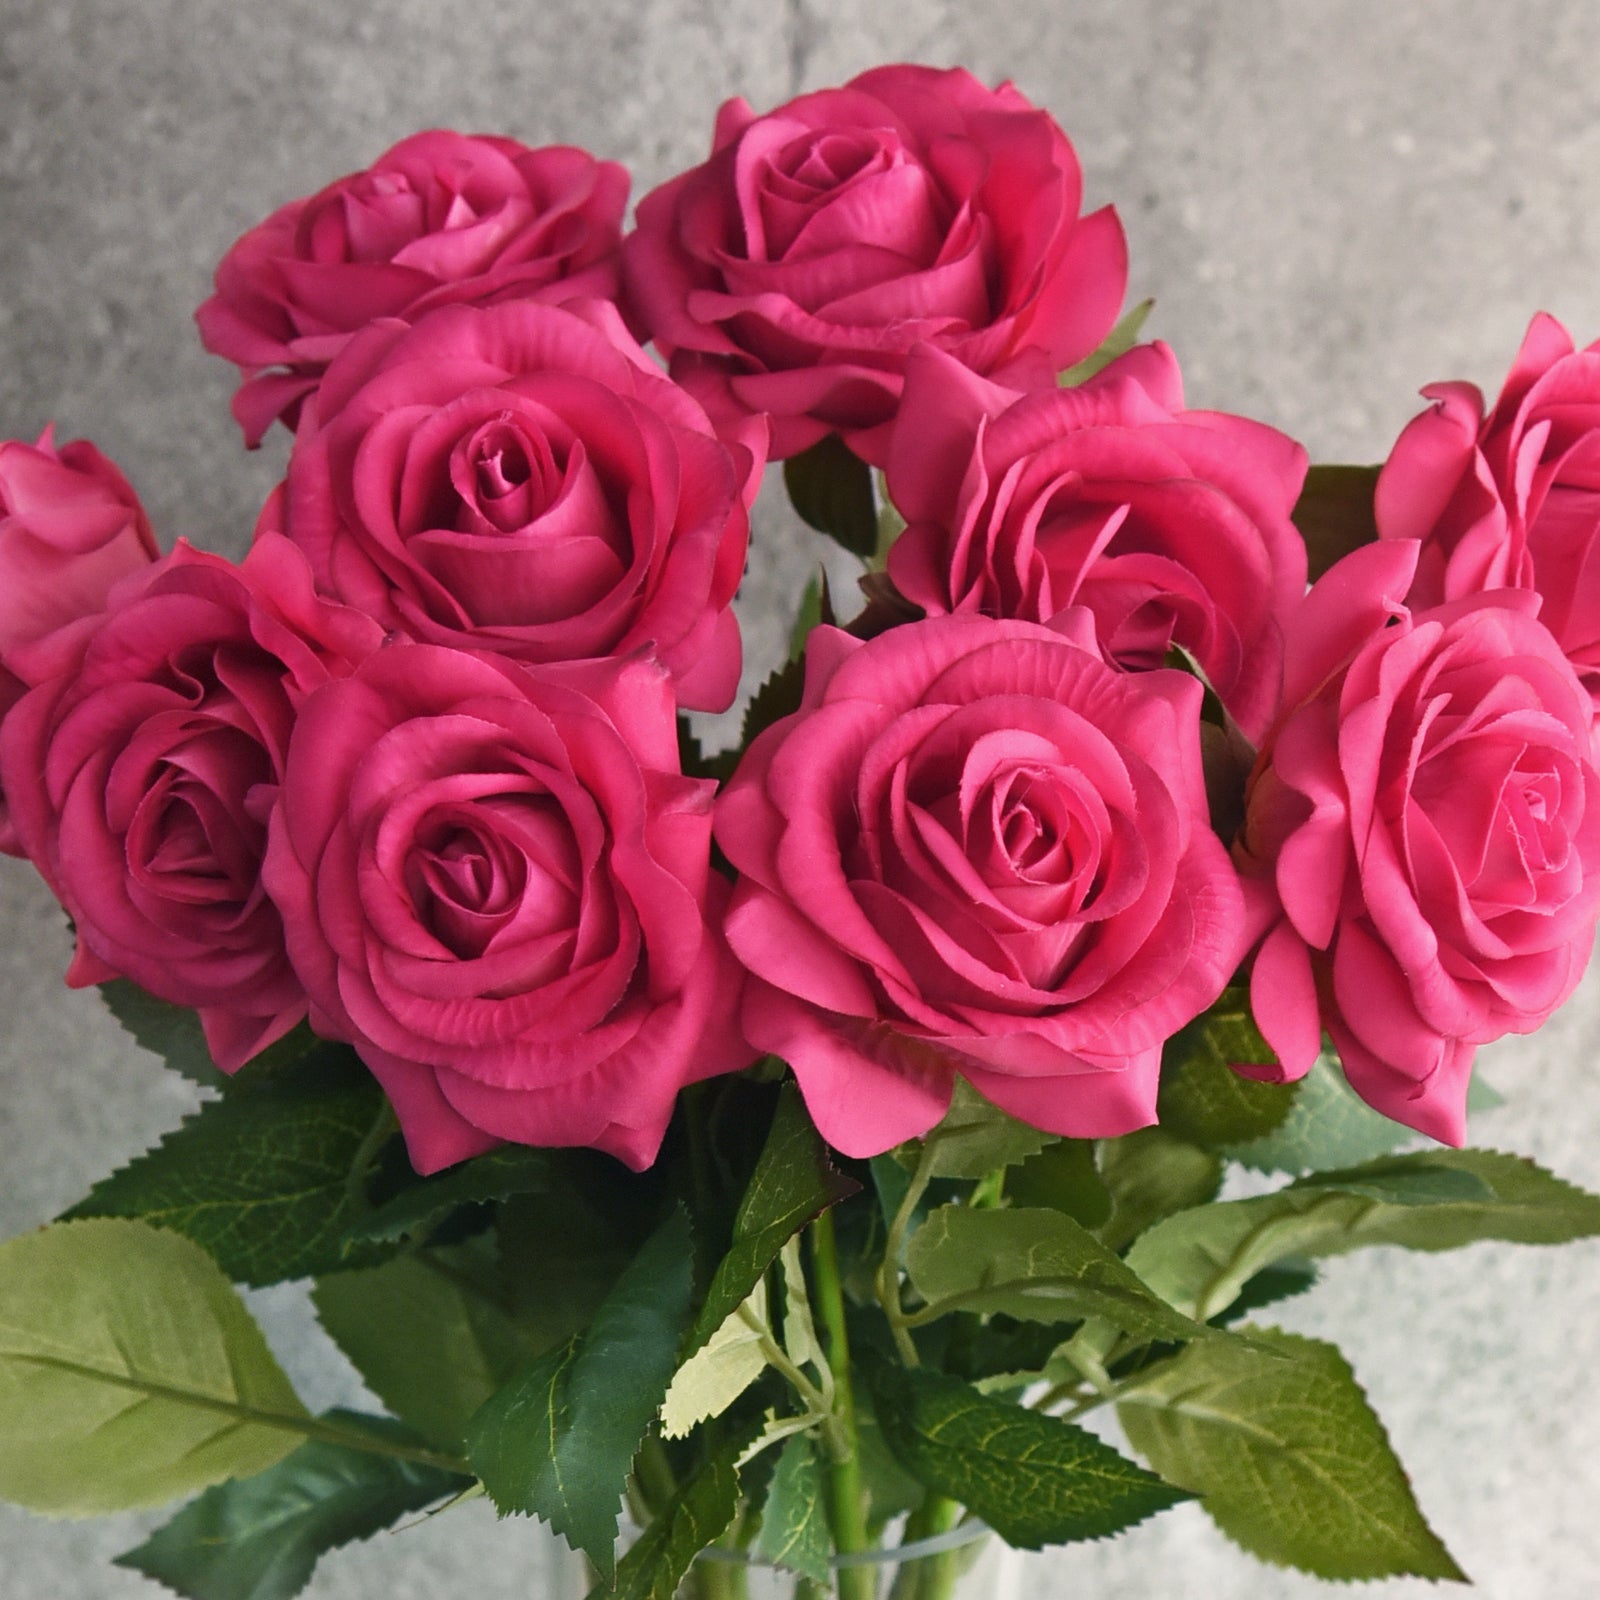 Hot Lady Real Touch Silk Artificial Flowers ‘Petals Feel and Look like Fresh Roses 10 Stems